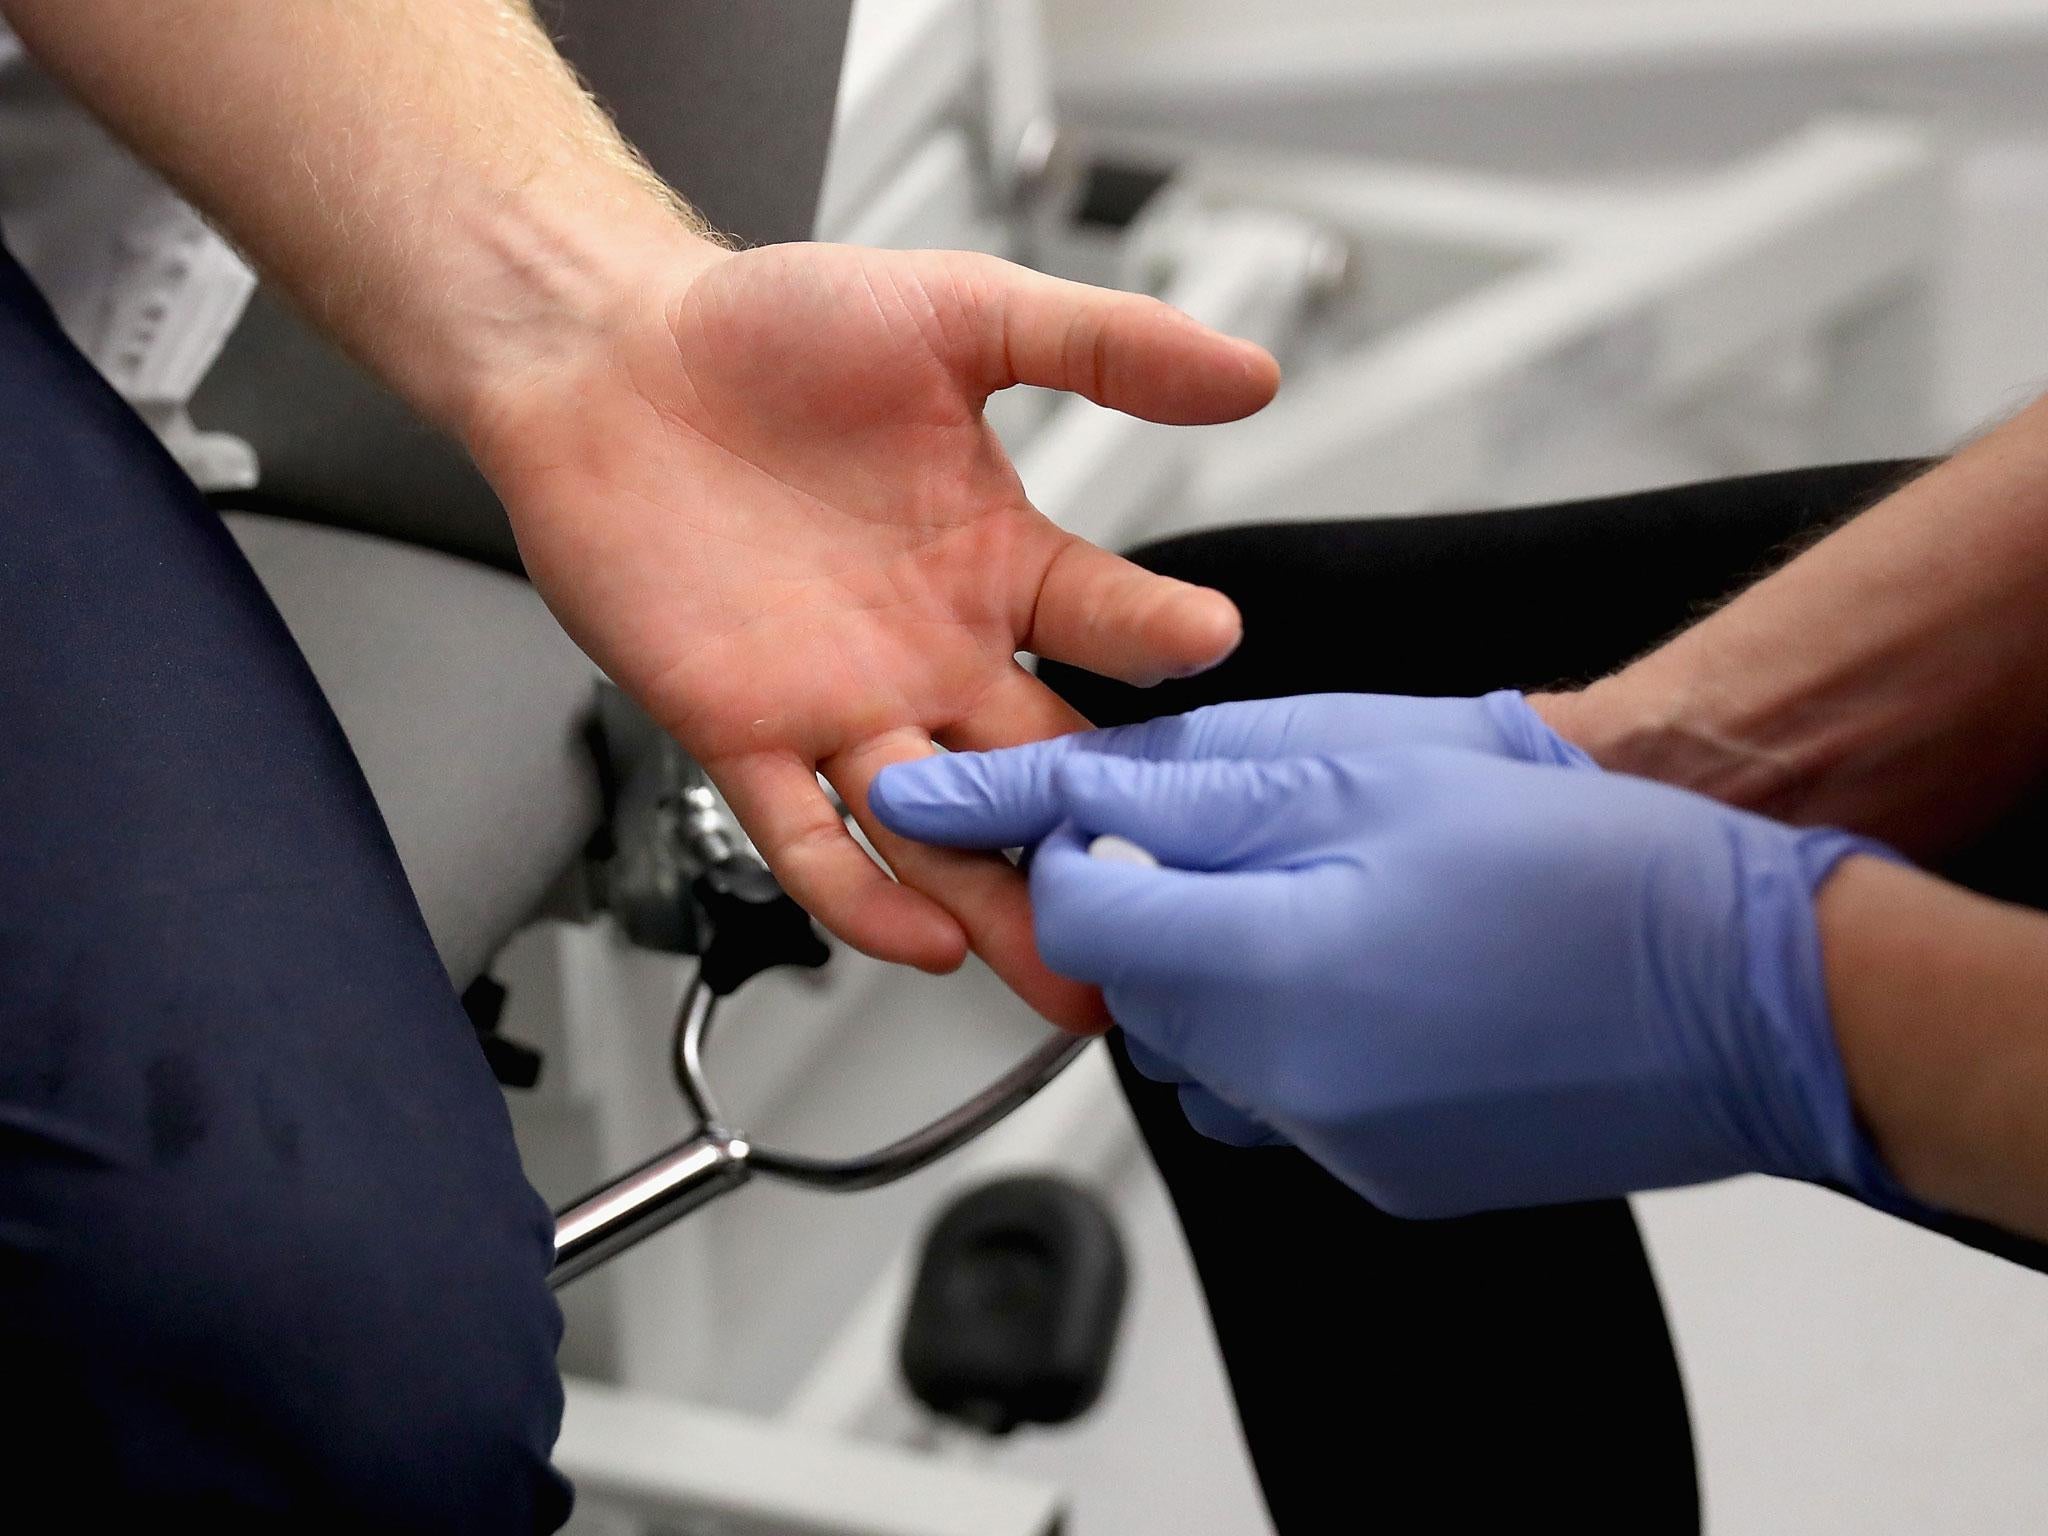 Finger prick tests were given to patients at 40 GP surgeries in Hackney, which has a high rate of HIV